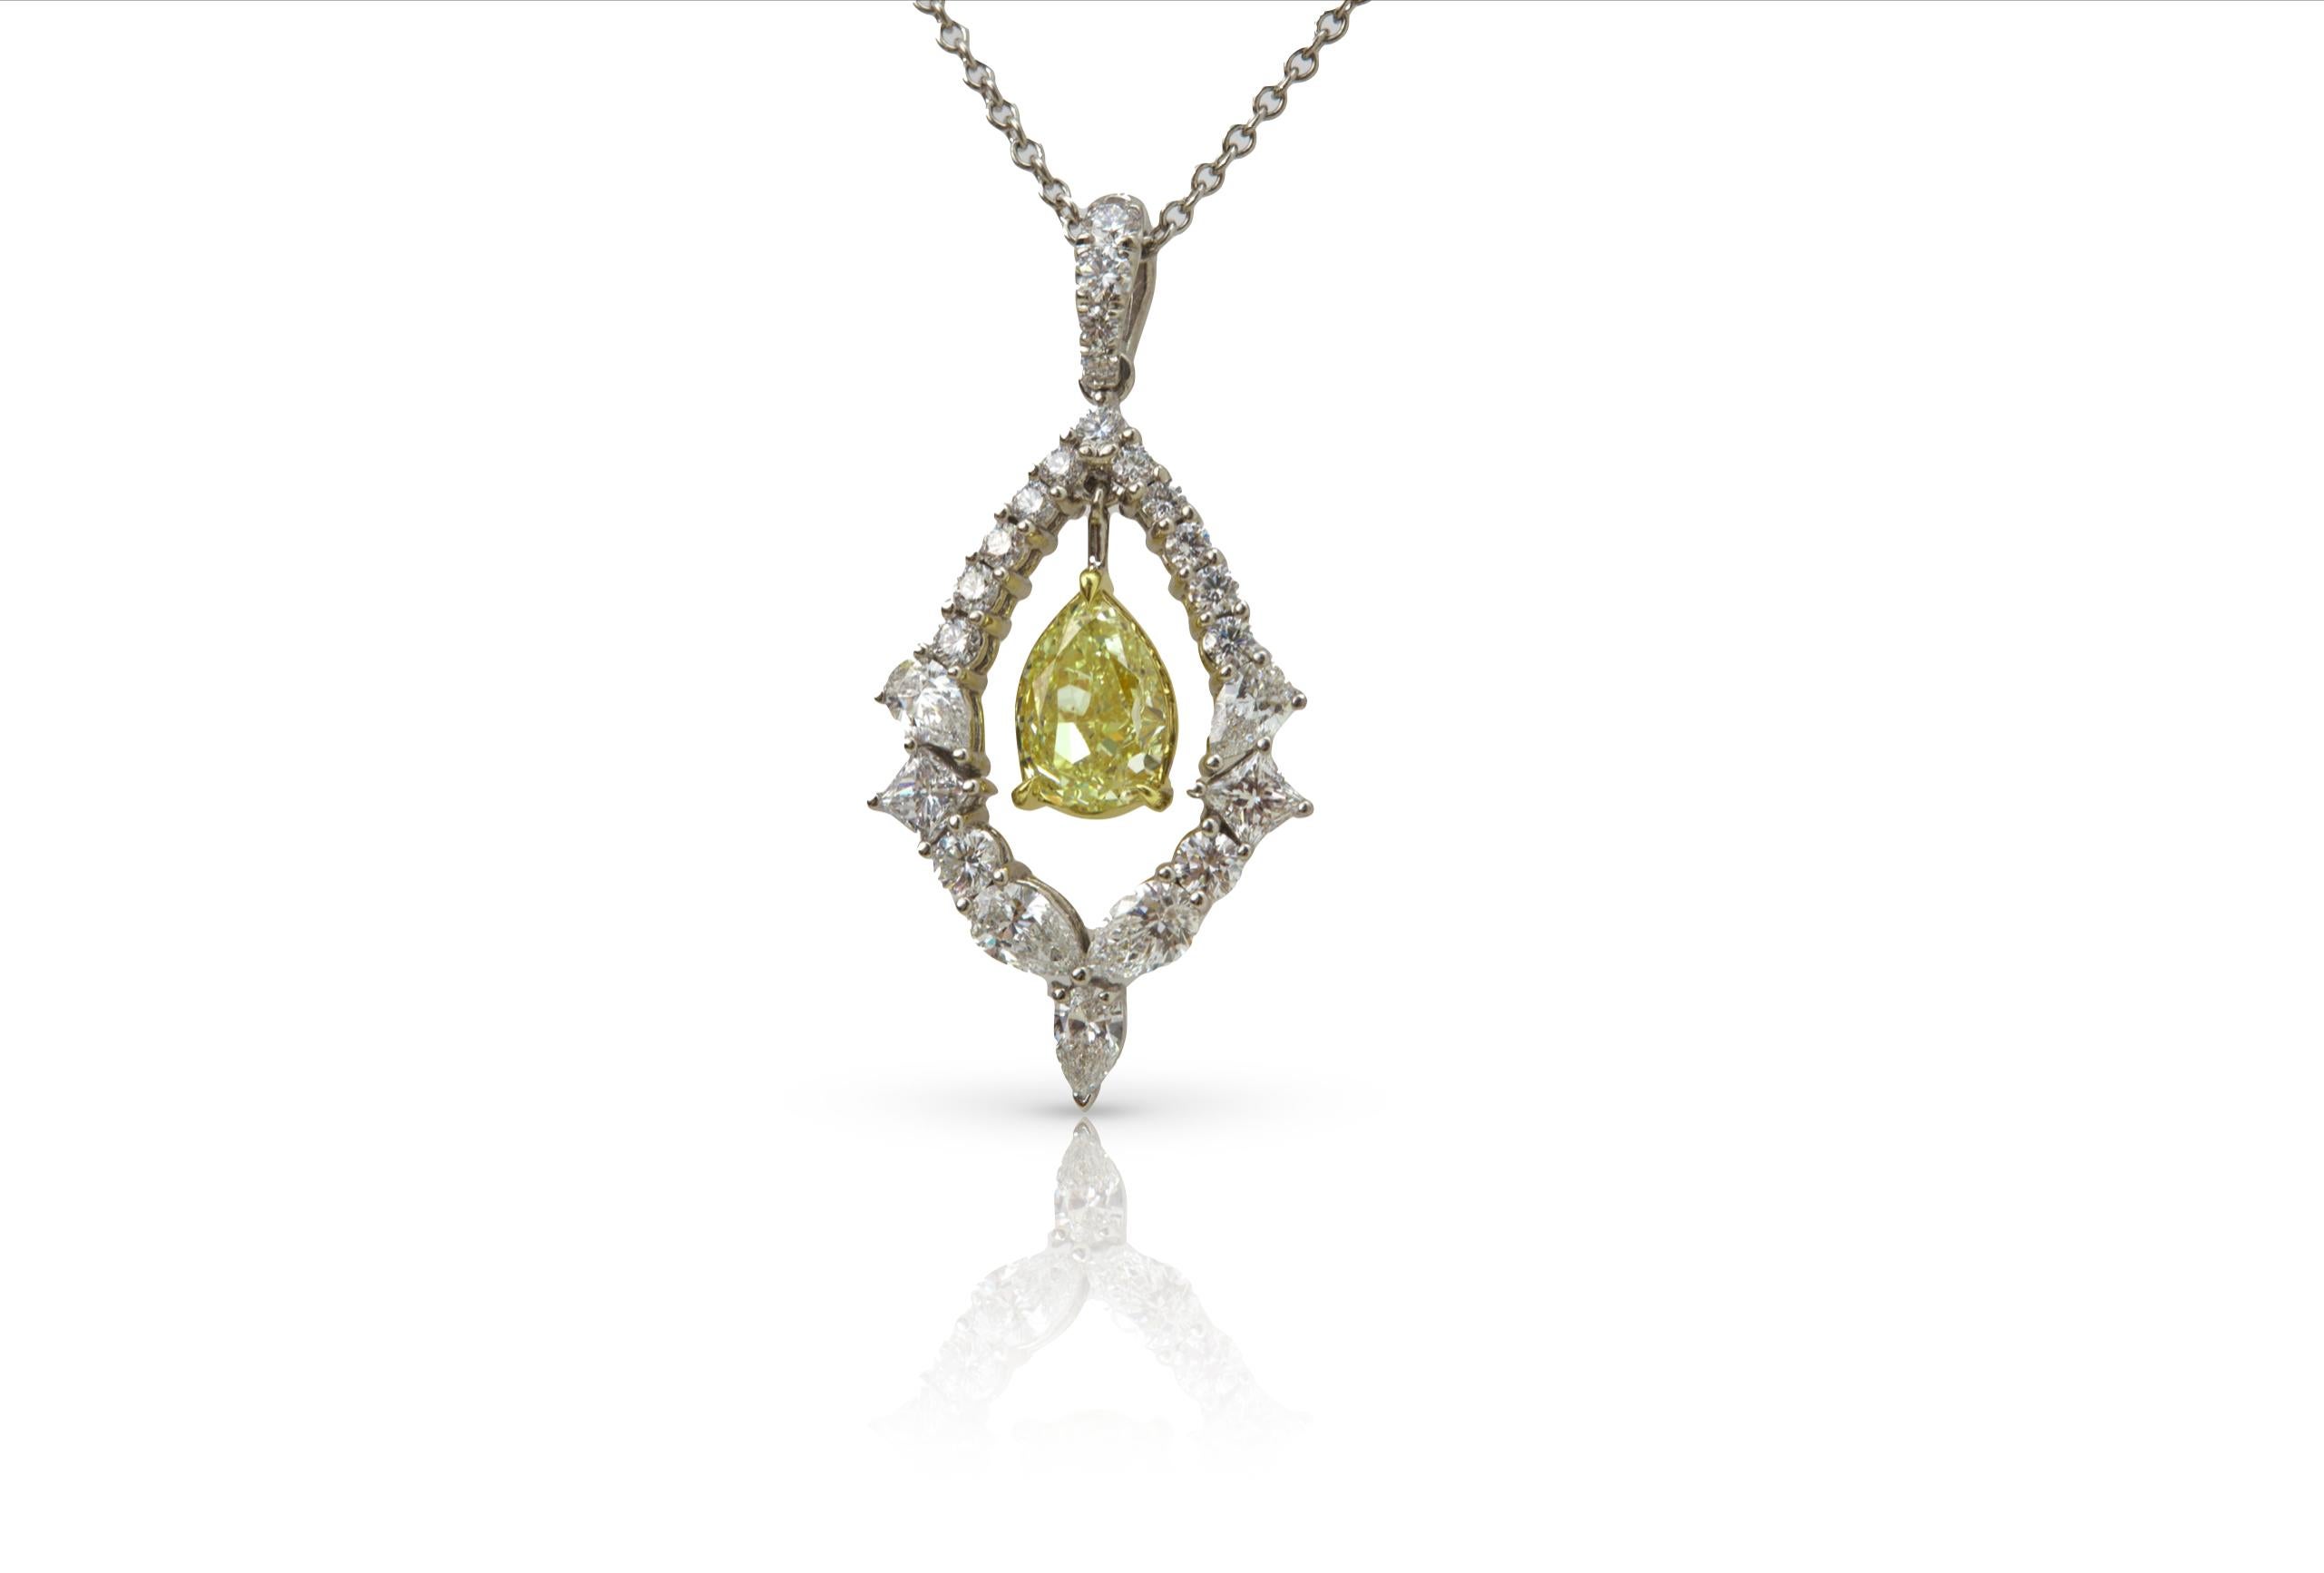 Featuring a stunning a 2.61 carat pear shaped Fancy Yellow color diamond pendant. certified by GIA as VVS1 clarity. The pendant is styled with a pear-shaped fancy yellow diamond in a floating prong setting, surrounded by a mix of pear-shaped and